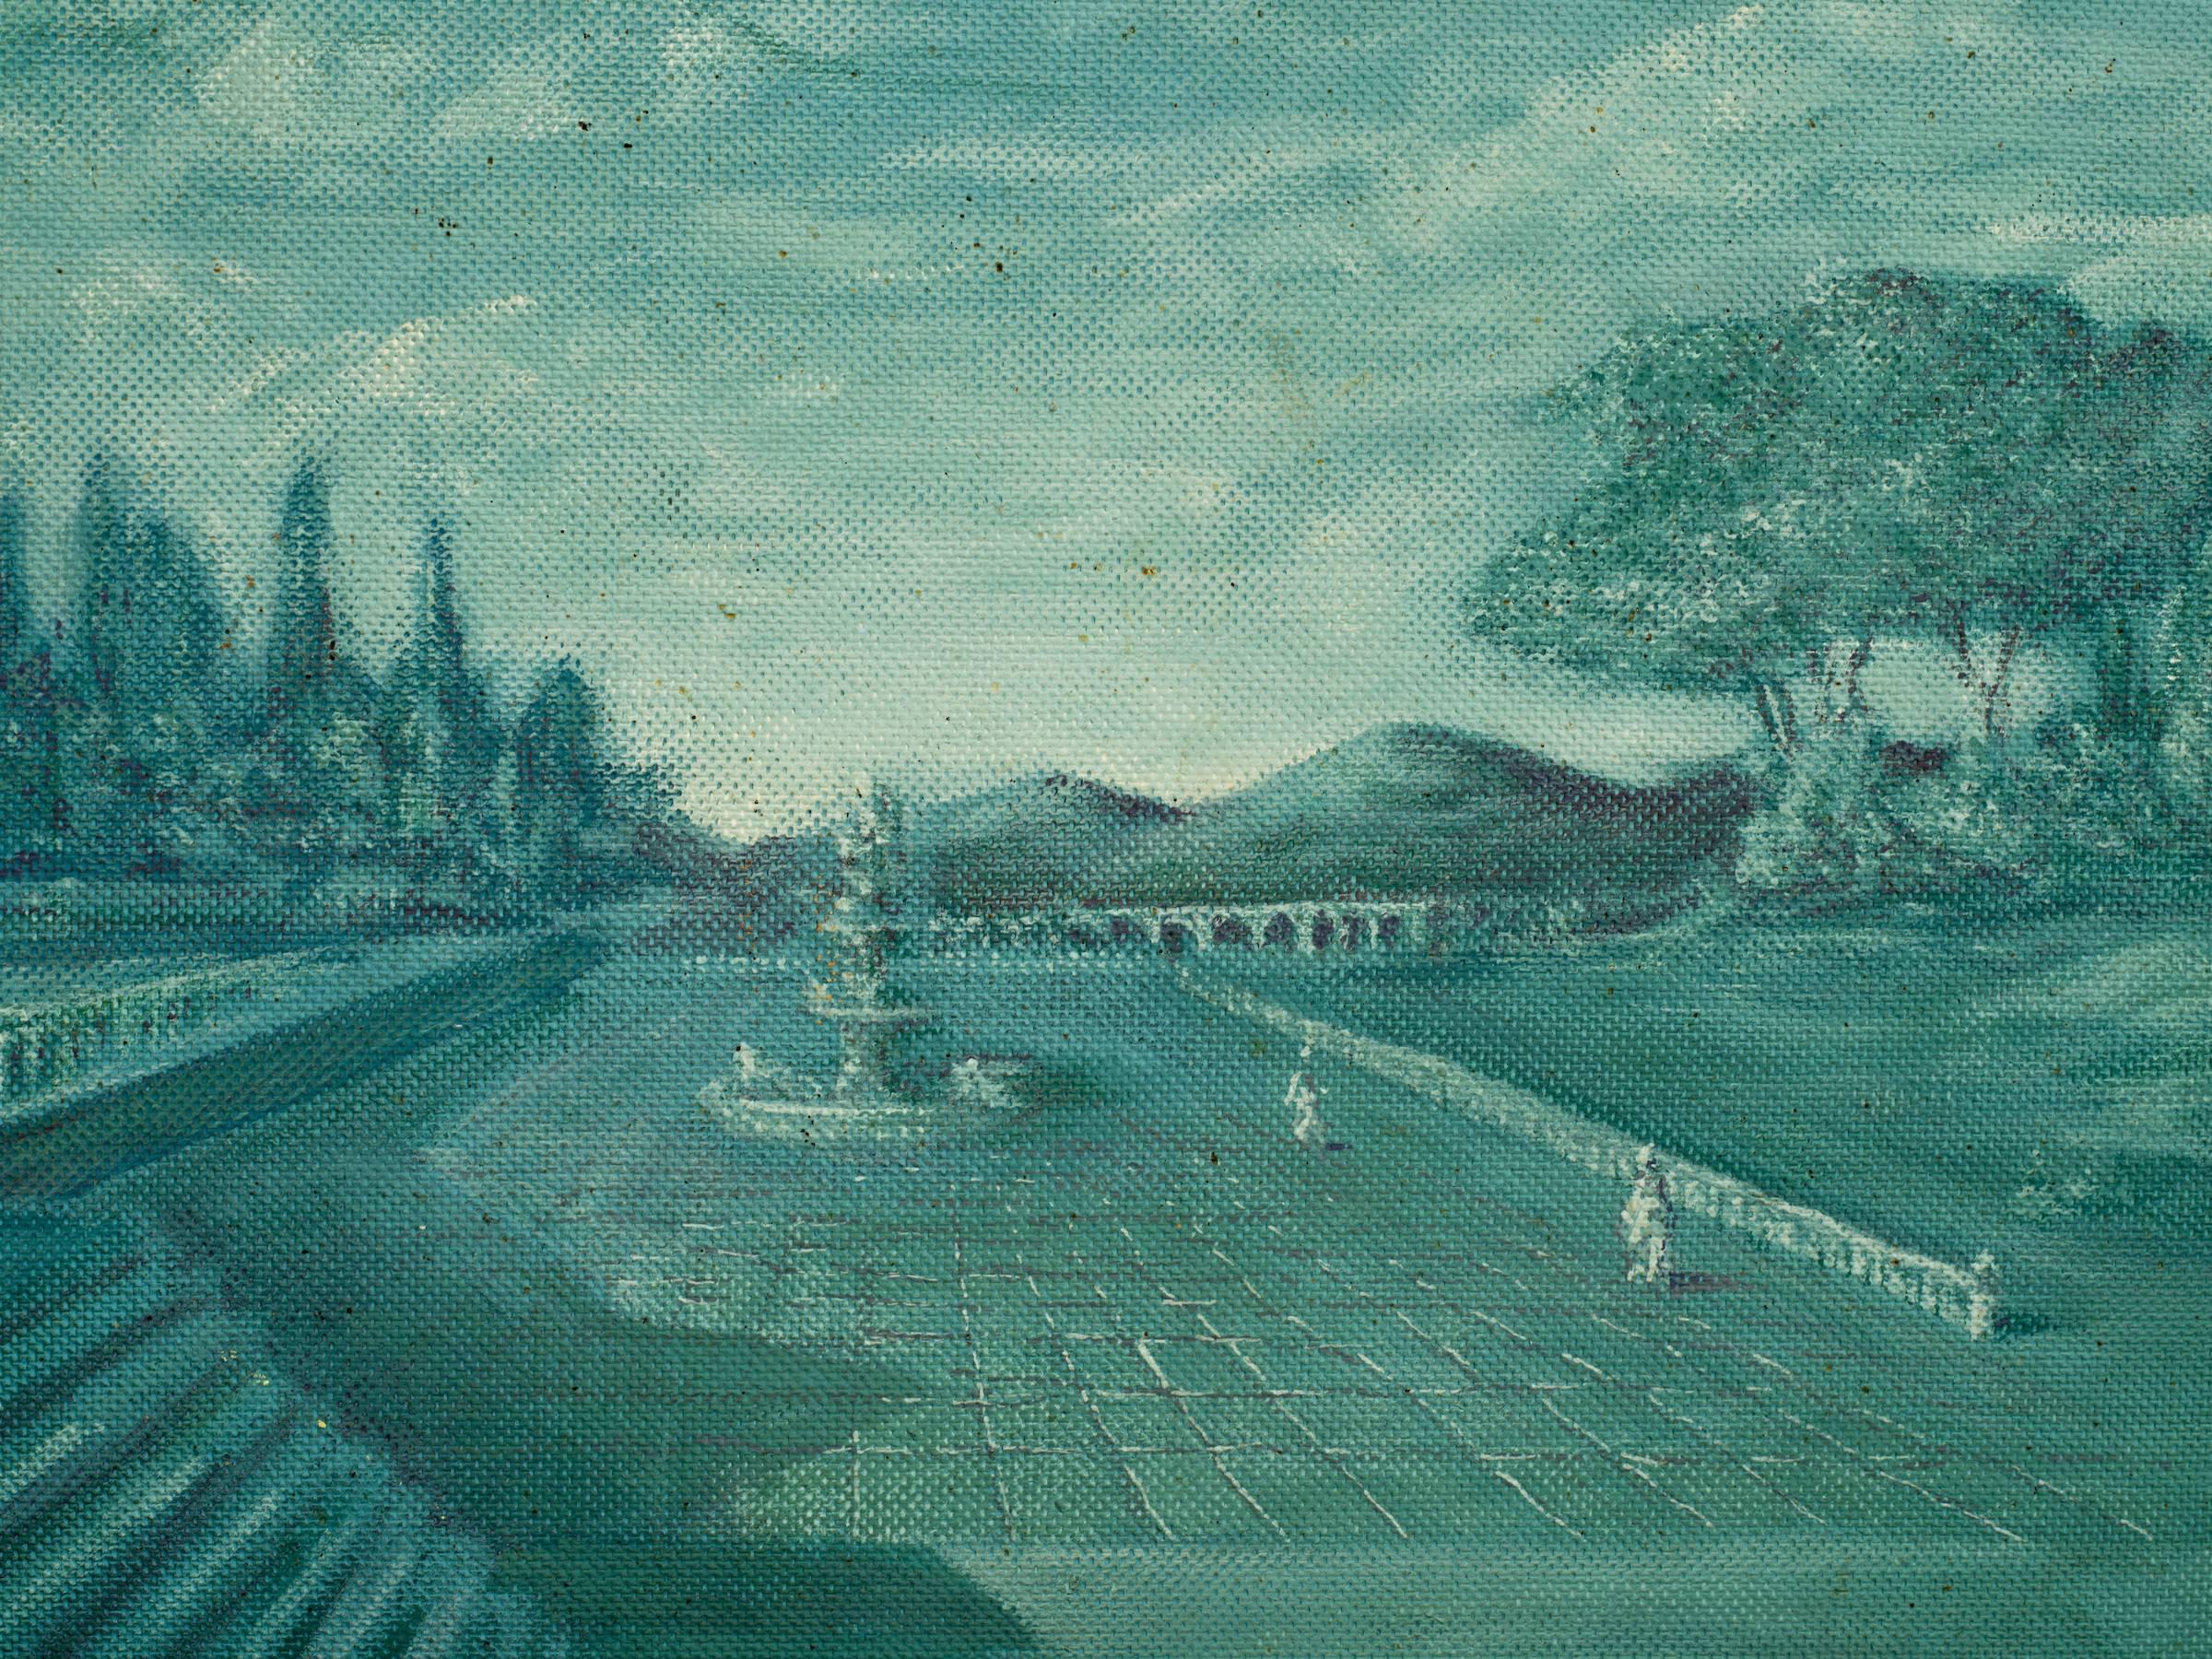 Oil on Board of Old Roman Architecture 2